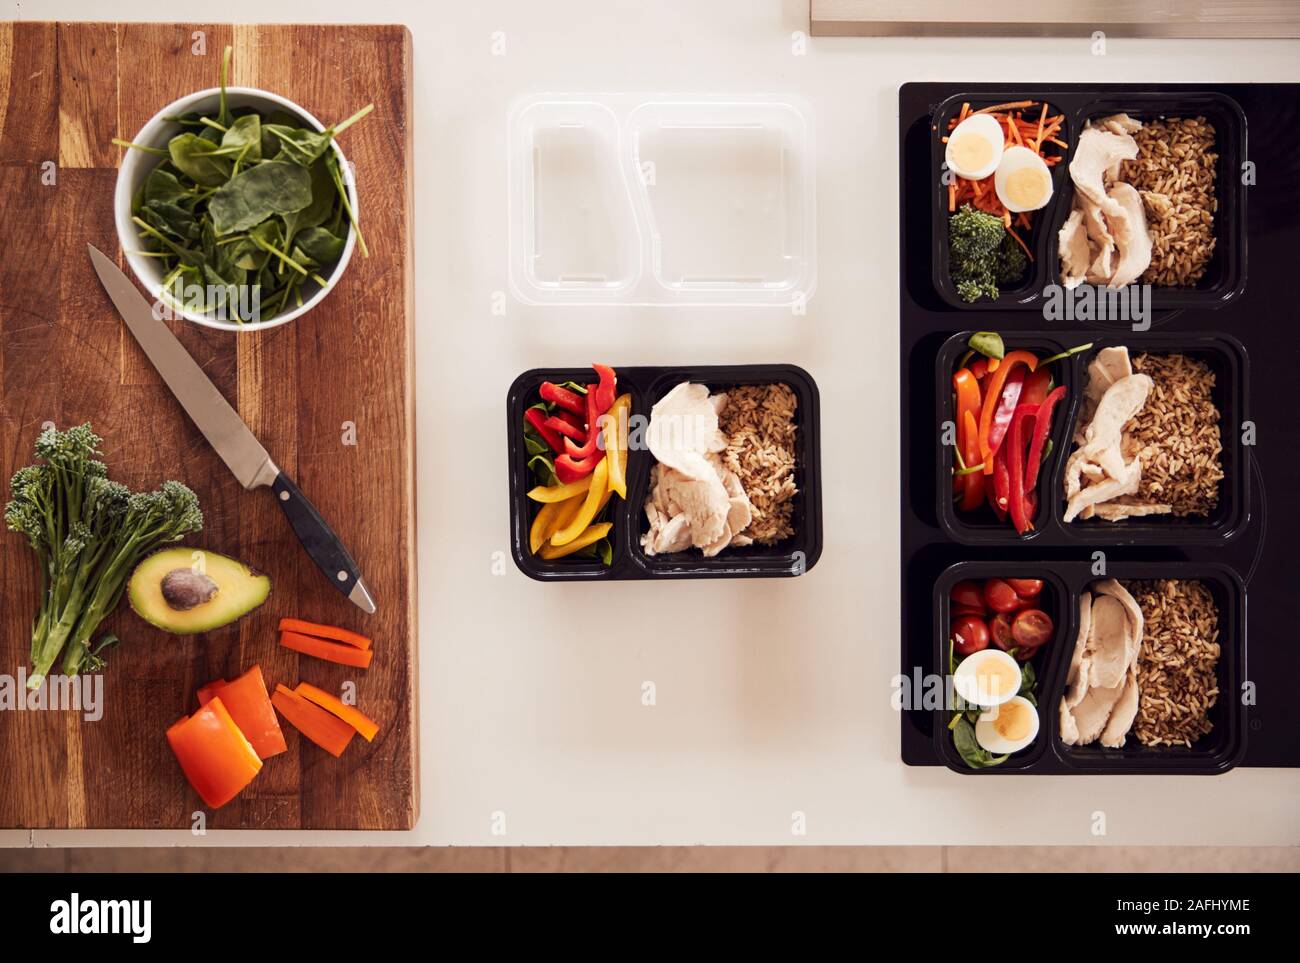 Overhead Shot Of Ingredients And Containers For Batch Of Healthy Meals At Home On Kitchen Counter Stock Photo